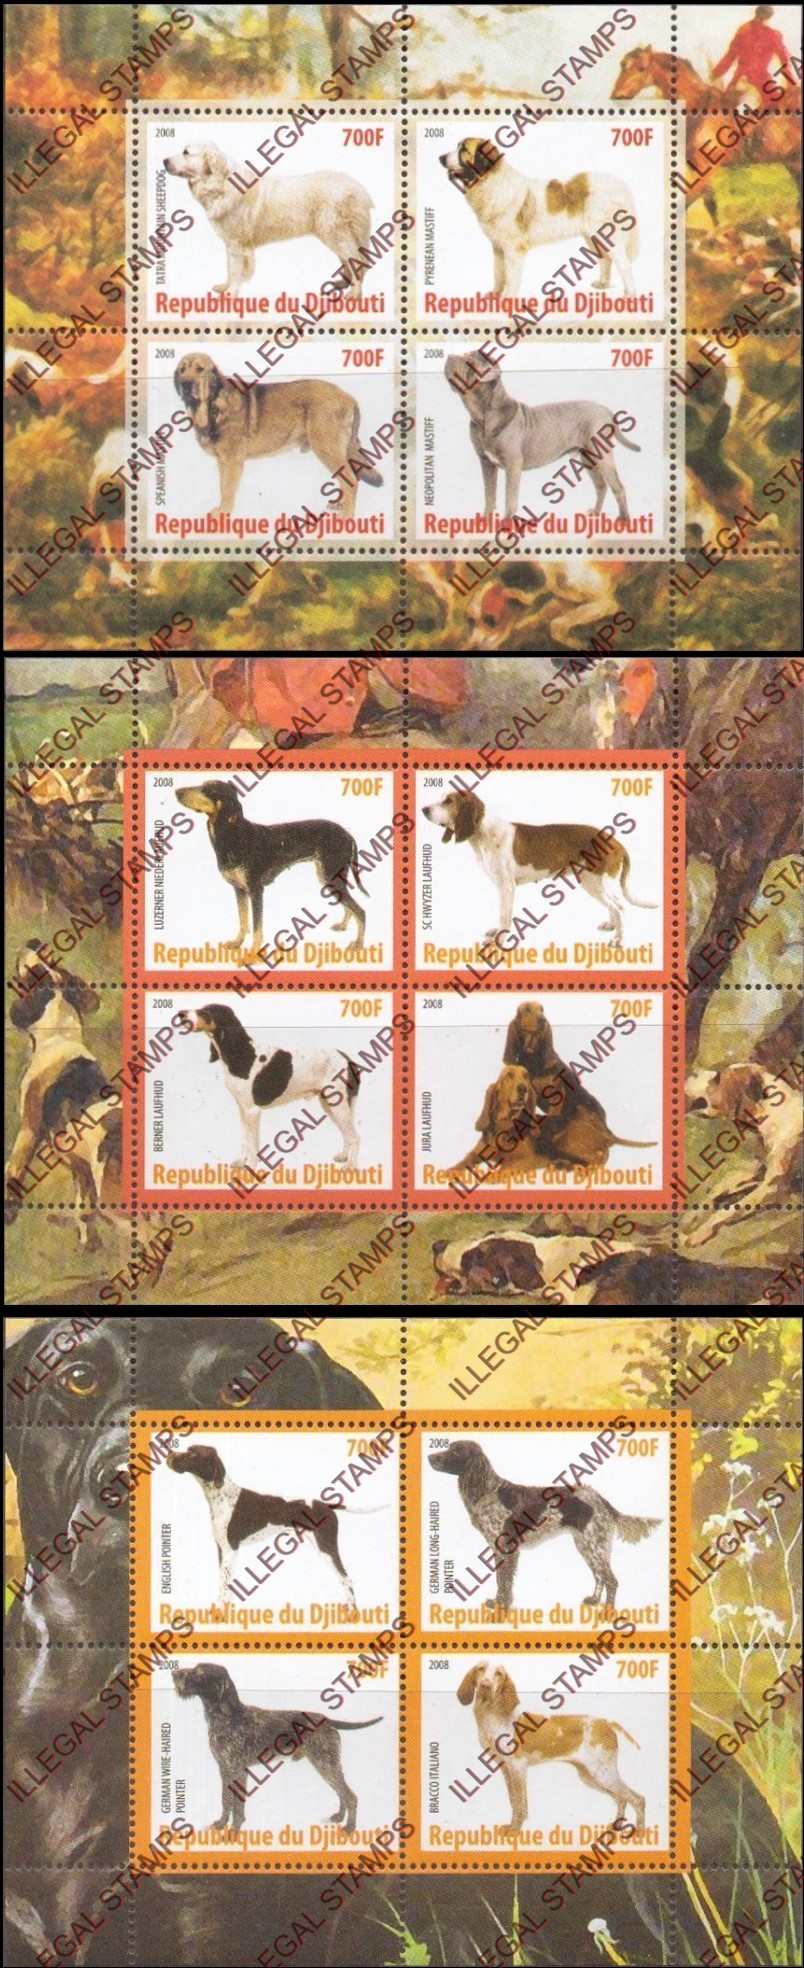 Djibouti 2008 Dogs Illegal Stamp Souvenir Sheets of 4